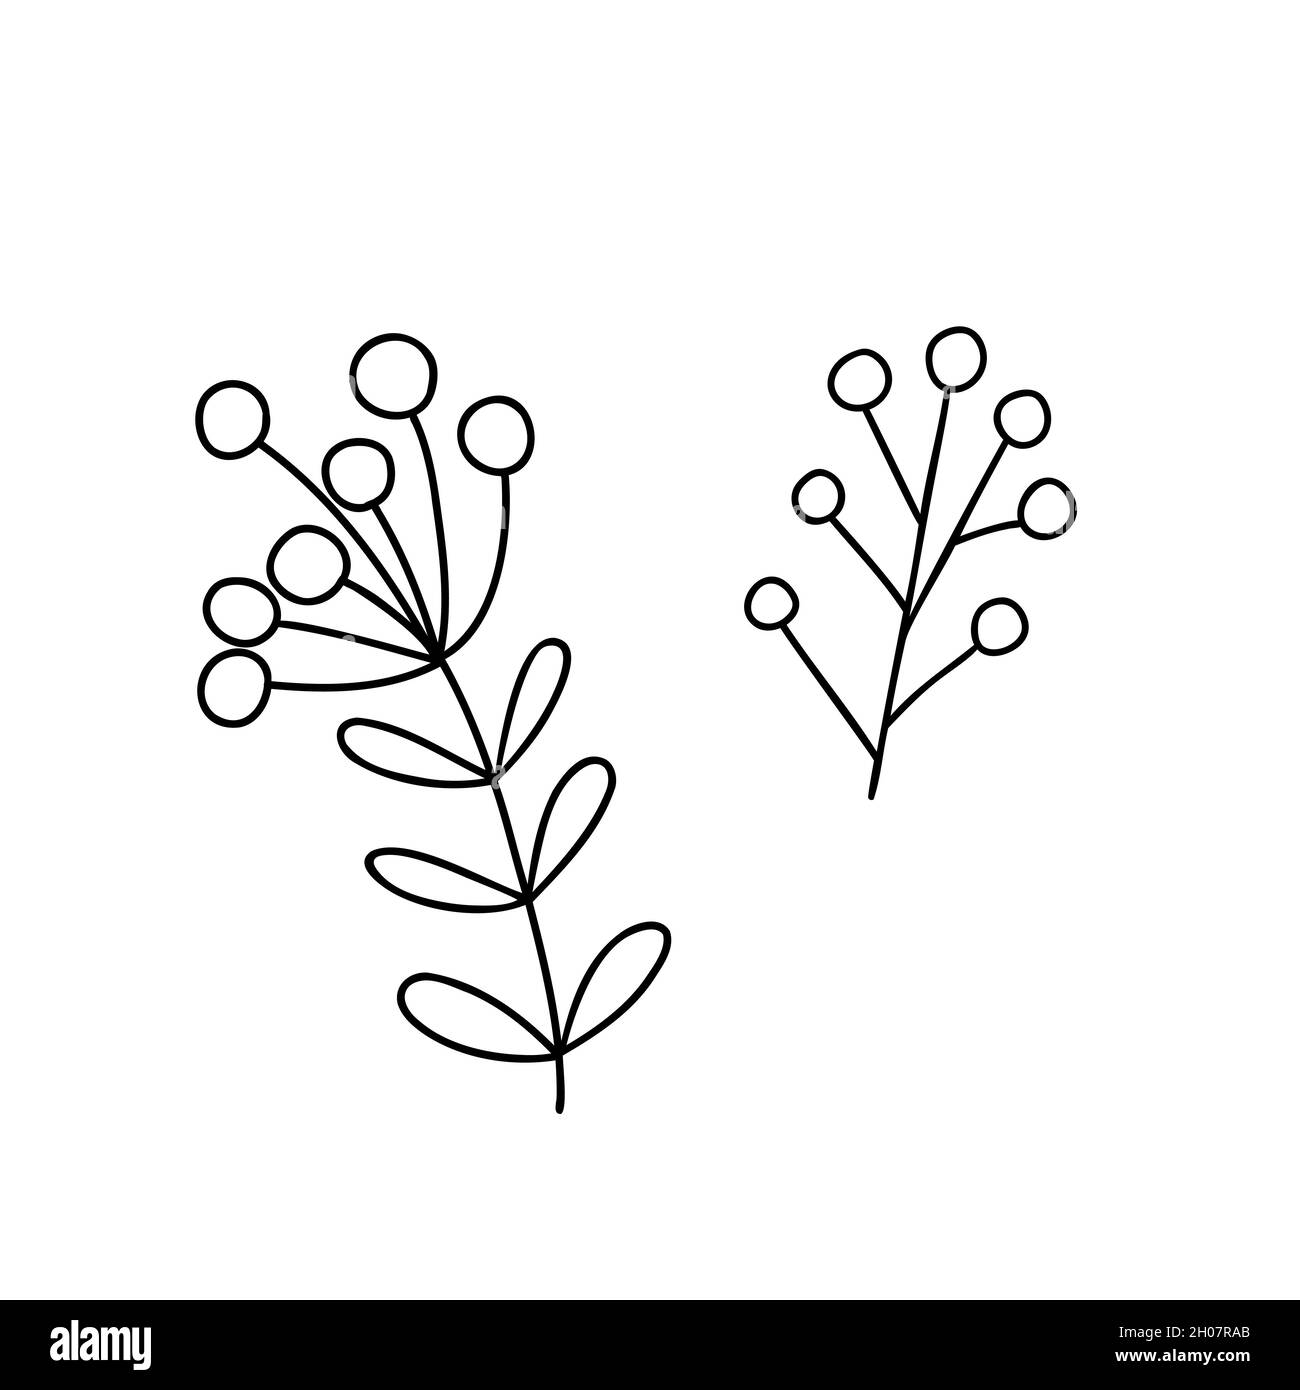 Christmas plant decorative branch with leaves, berries for home decor, festive holiday arrangement, vector illustration for seasonal greeting card, invitation, banner Stock Vector